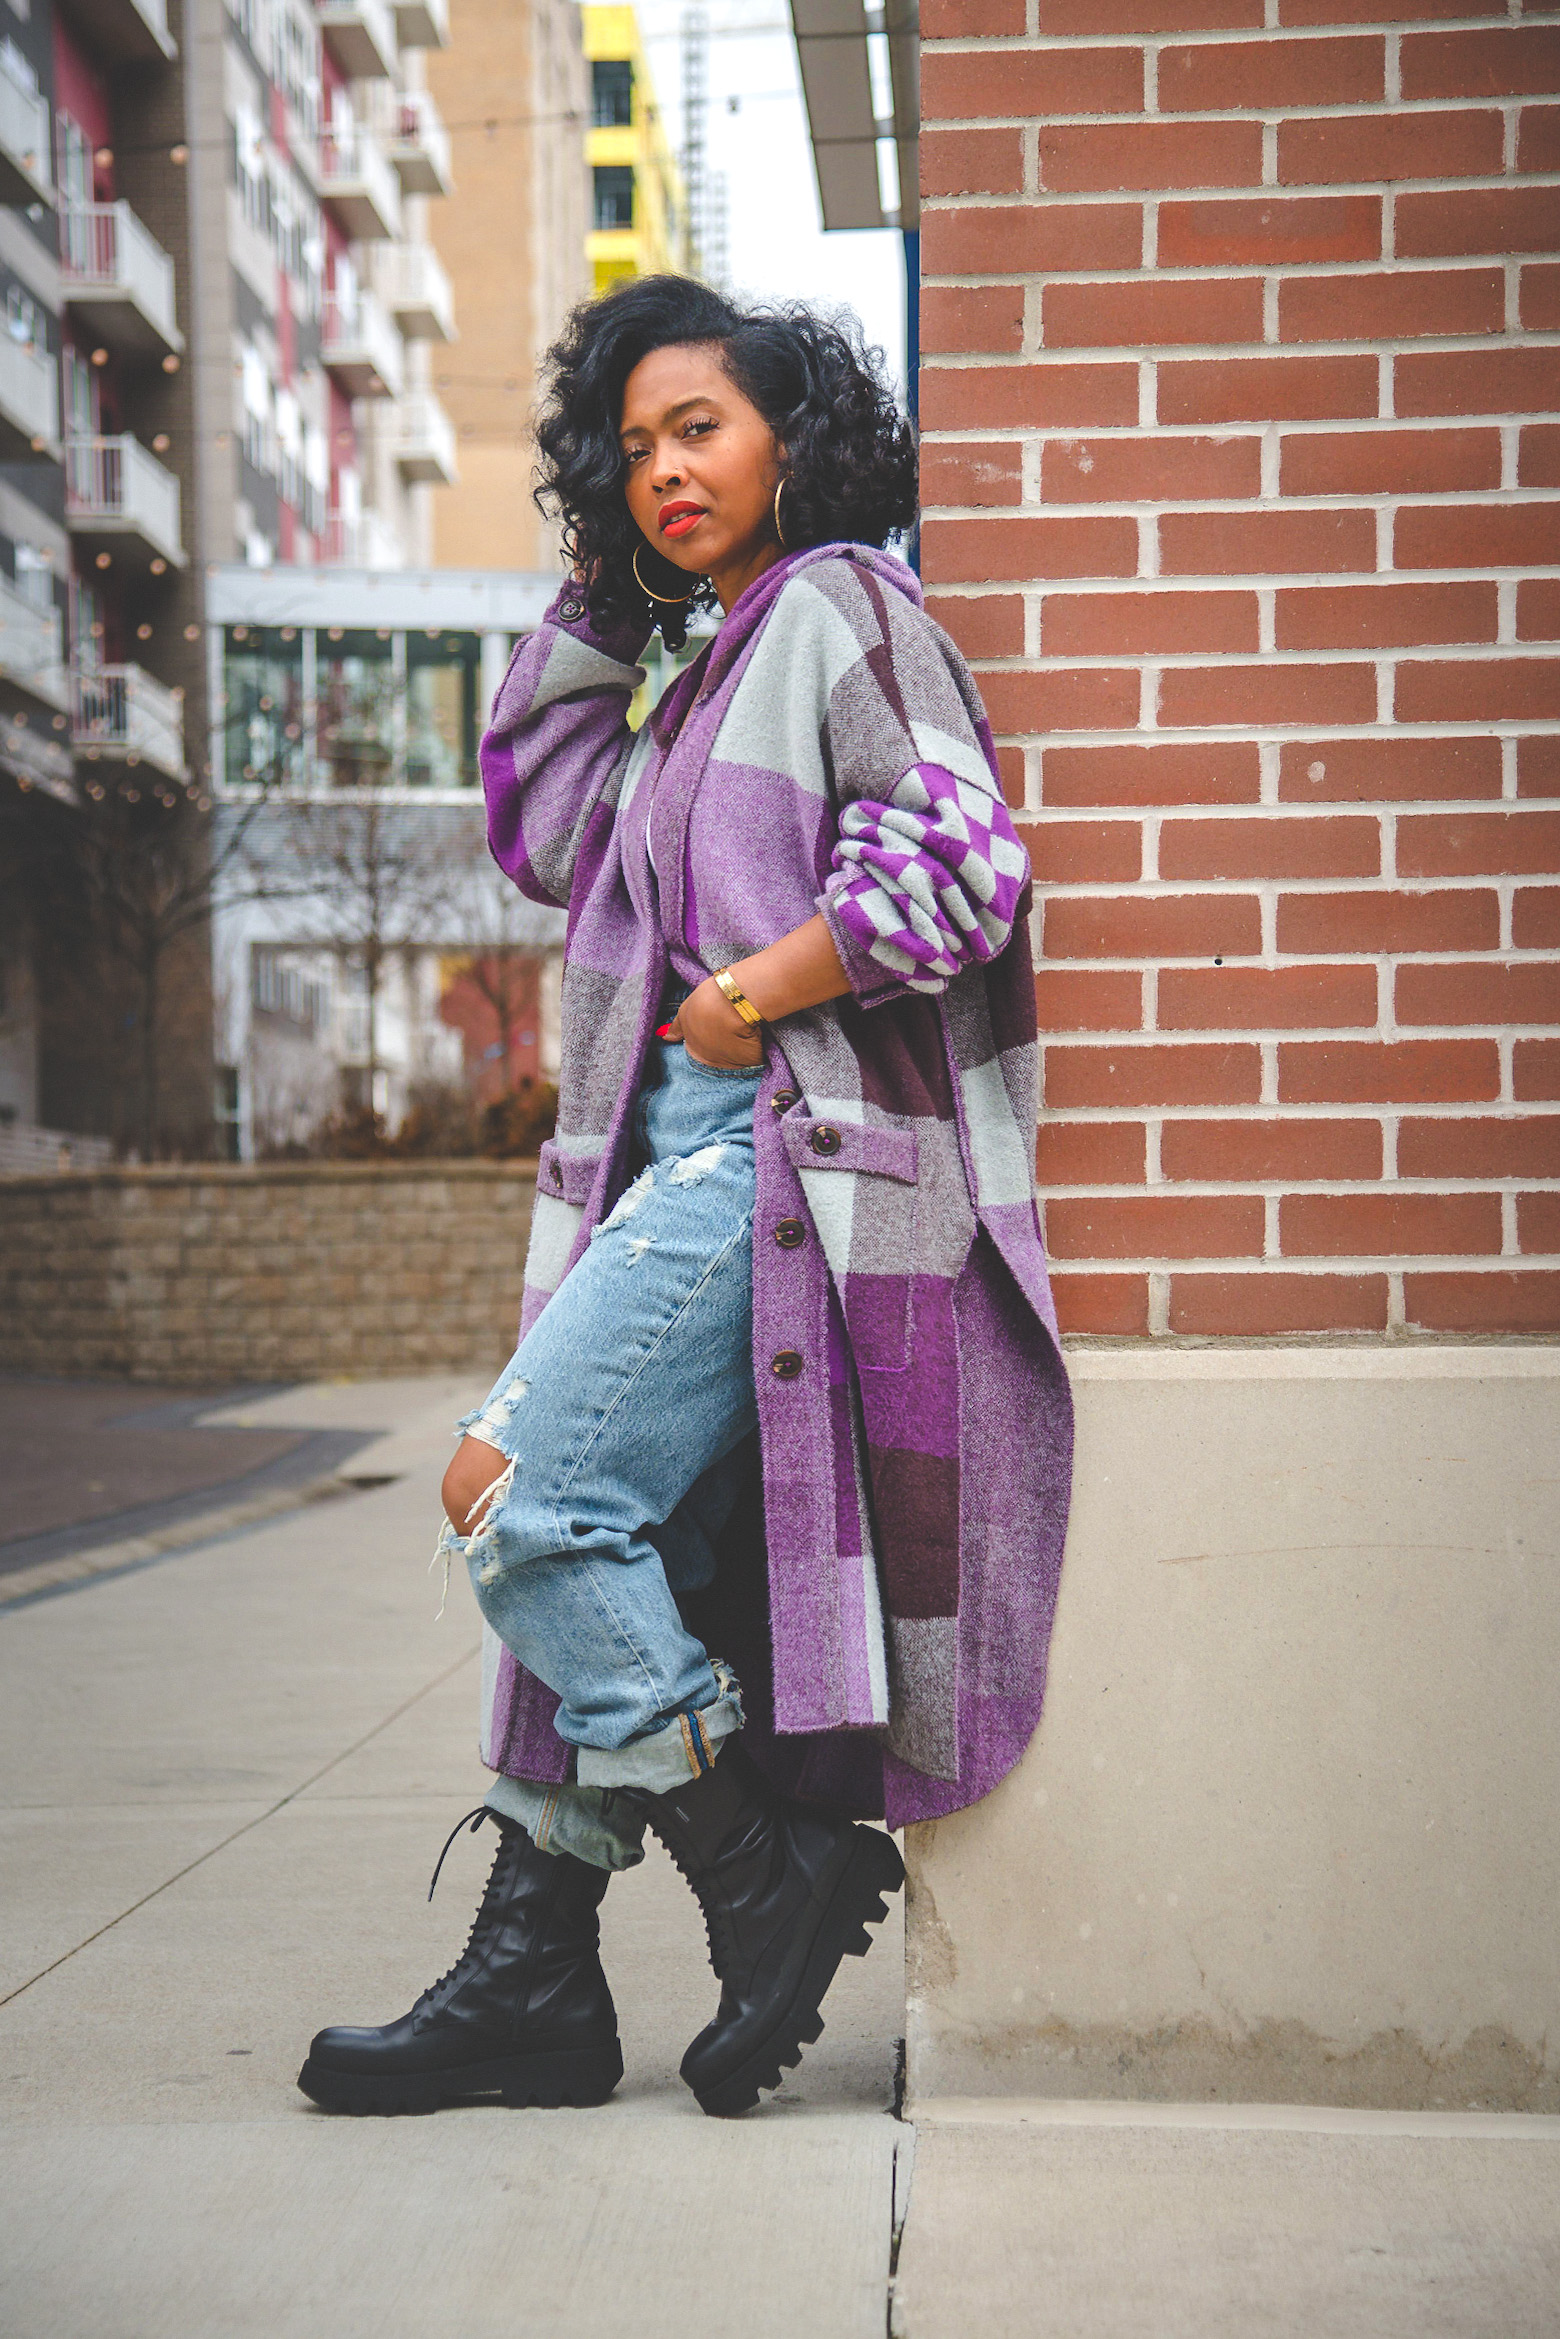 SWEENEE STYLE, BLACK GIRLS WHO BLOG, NATURAL HAIR BLOGGER, INDIANAPOLIS STYLE BLOG, FREE PEOPLE STYLE, EASY OUTFIT IDEAS, SWEENEESTYLEBLOGGER